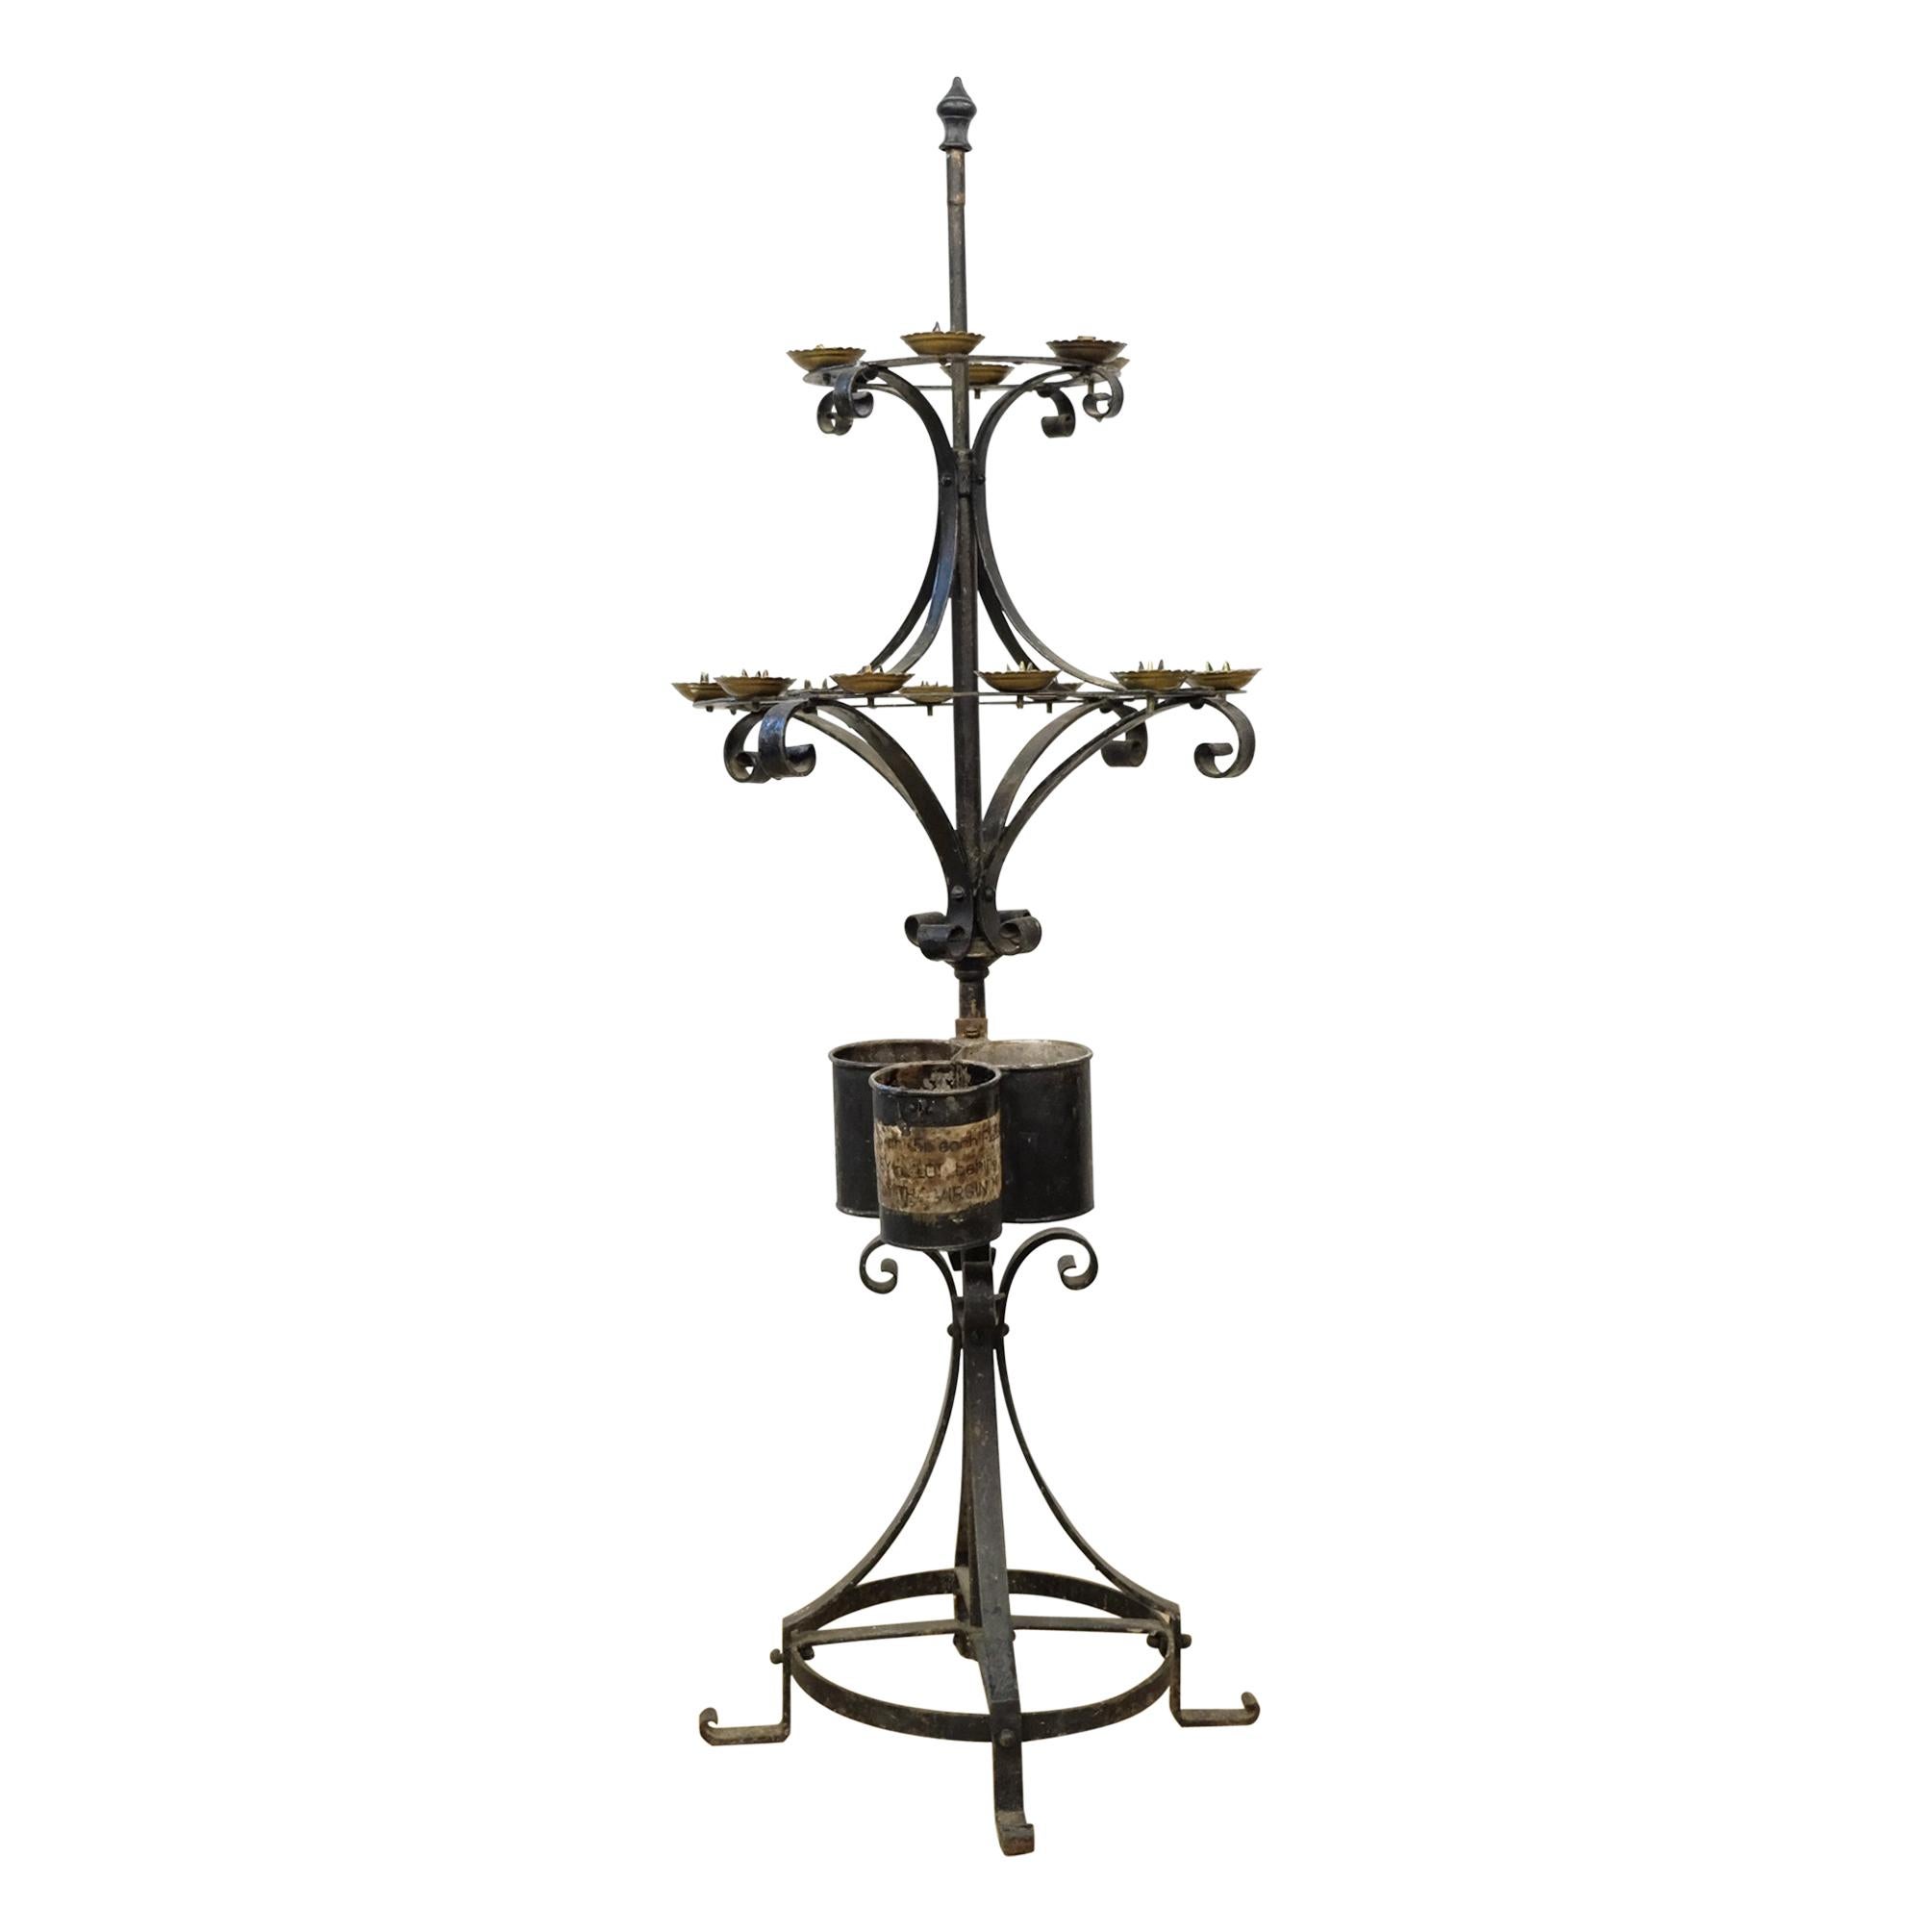 Large Church Votive Candle Stand, Wrought Iron, 19th Century, Floor Standing